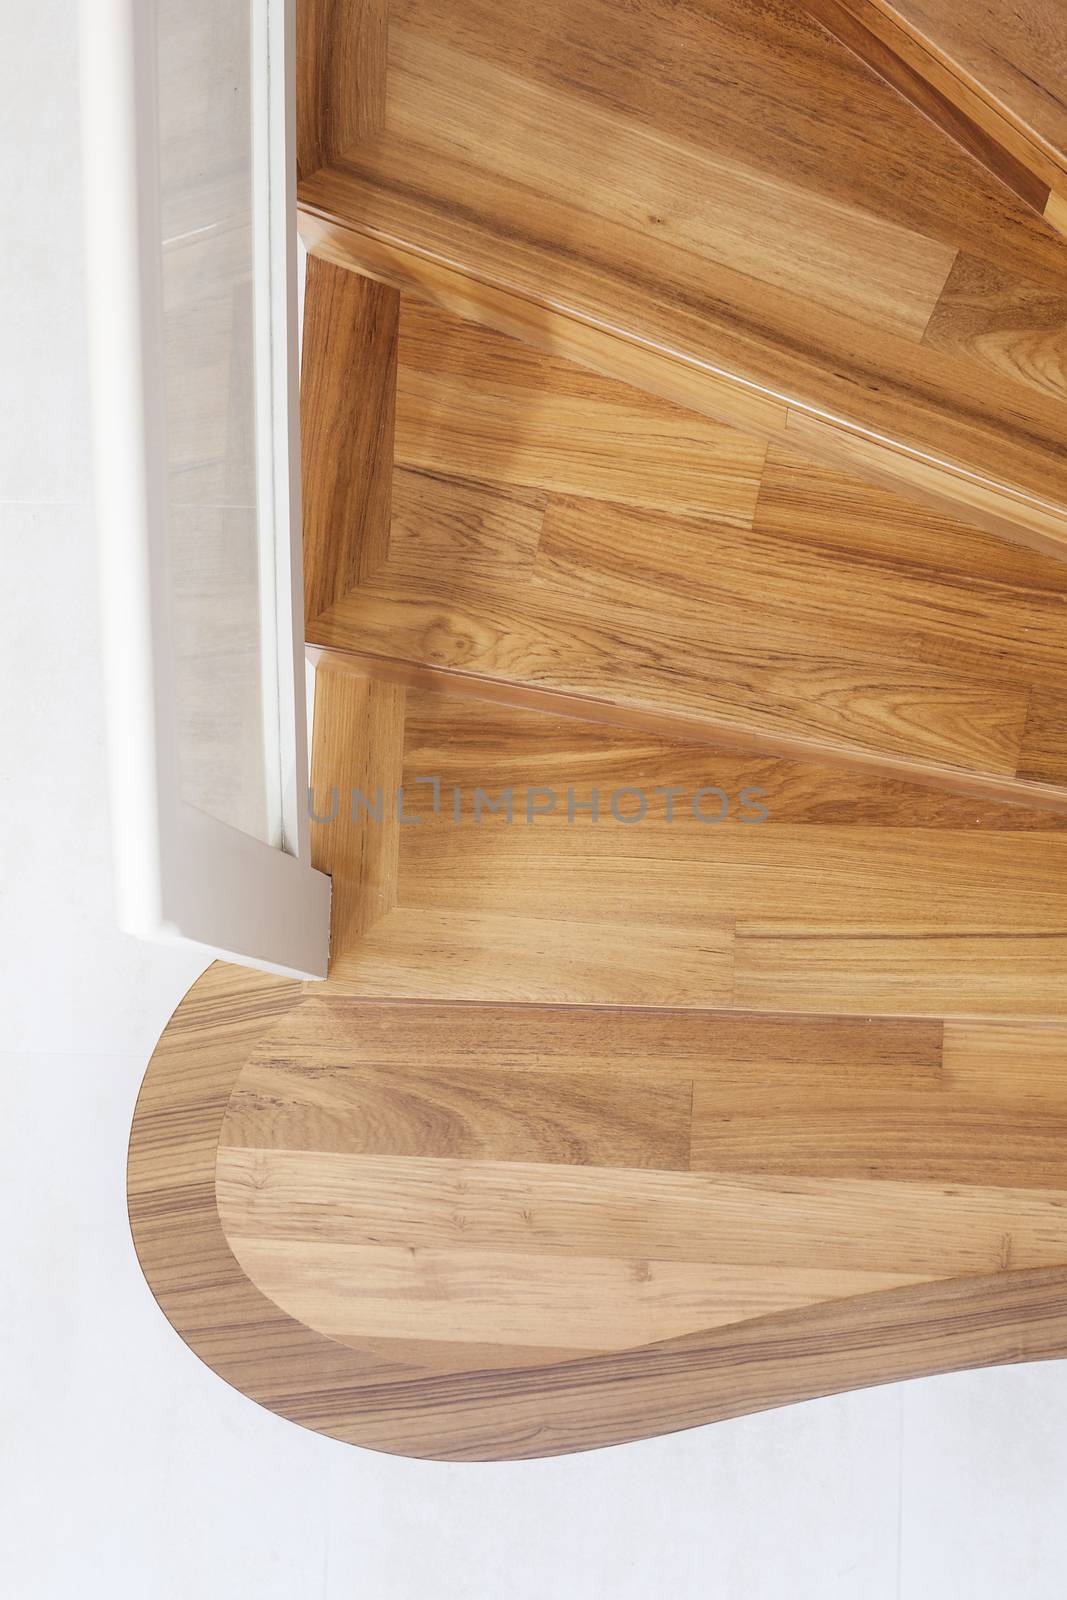 Part of interior wooden stairs  by vwalakte